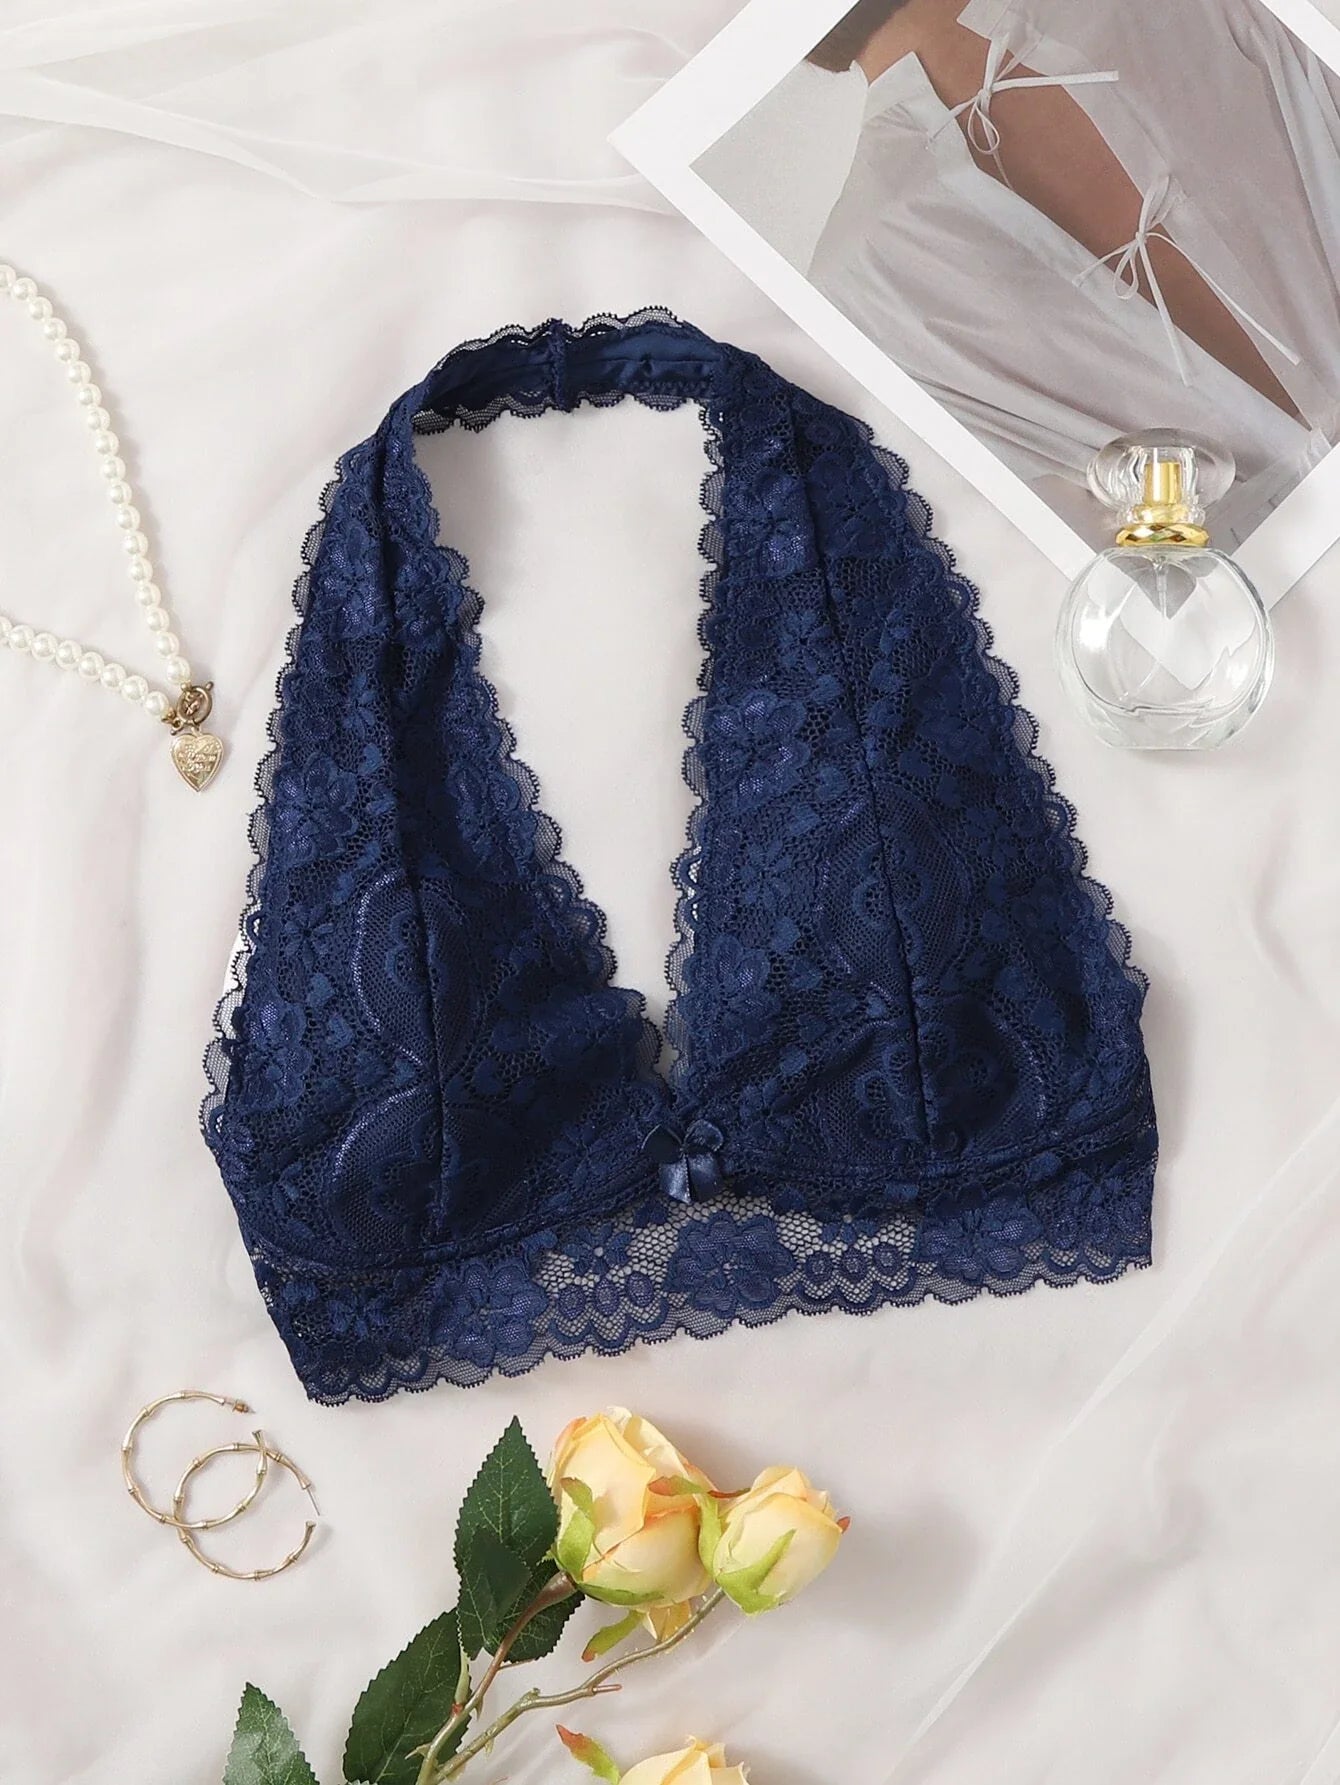 Shein 2pack Floral Lace Bralette